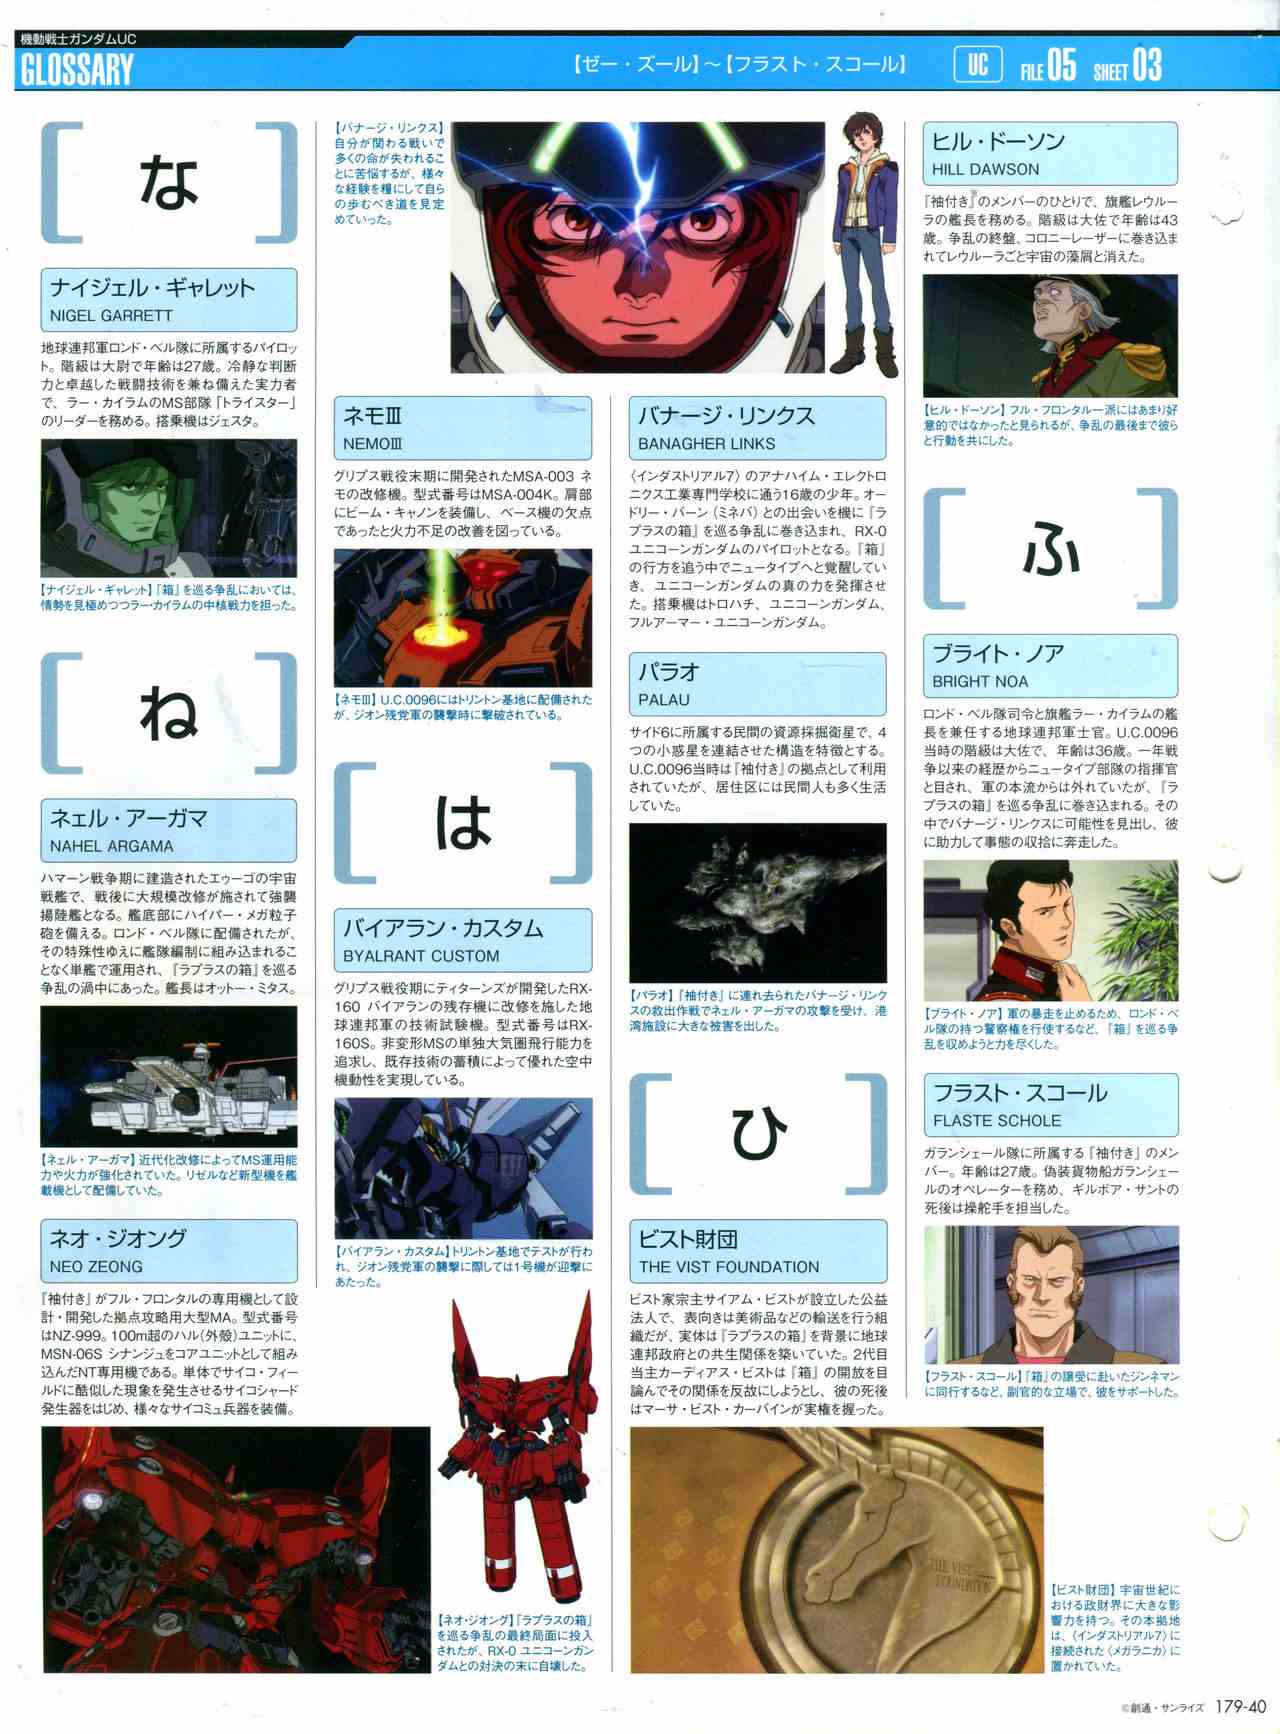 The Official Gundam Perfect File  - 179話 - 7